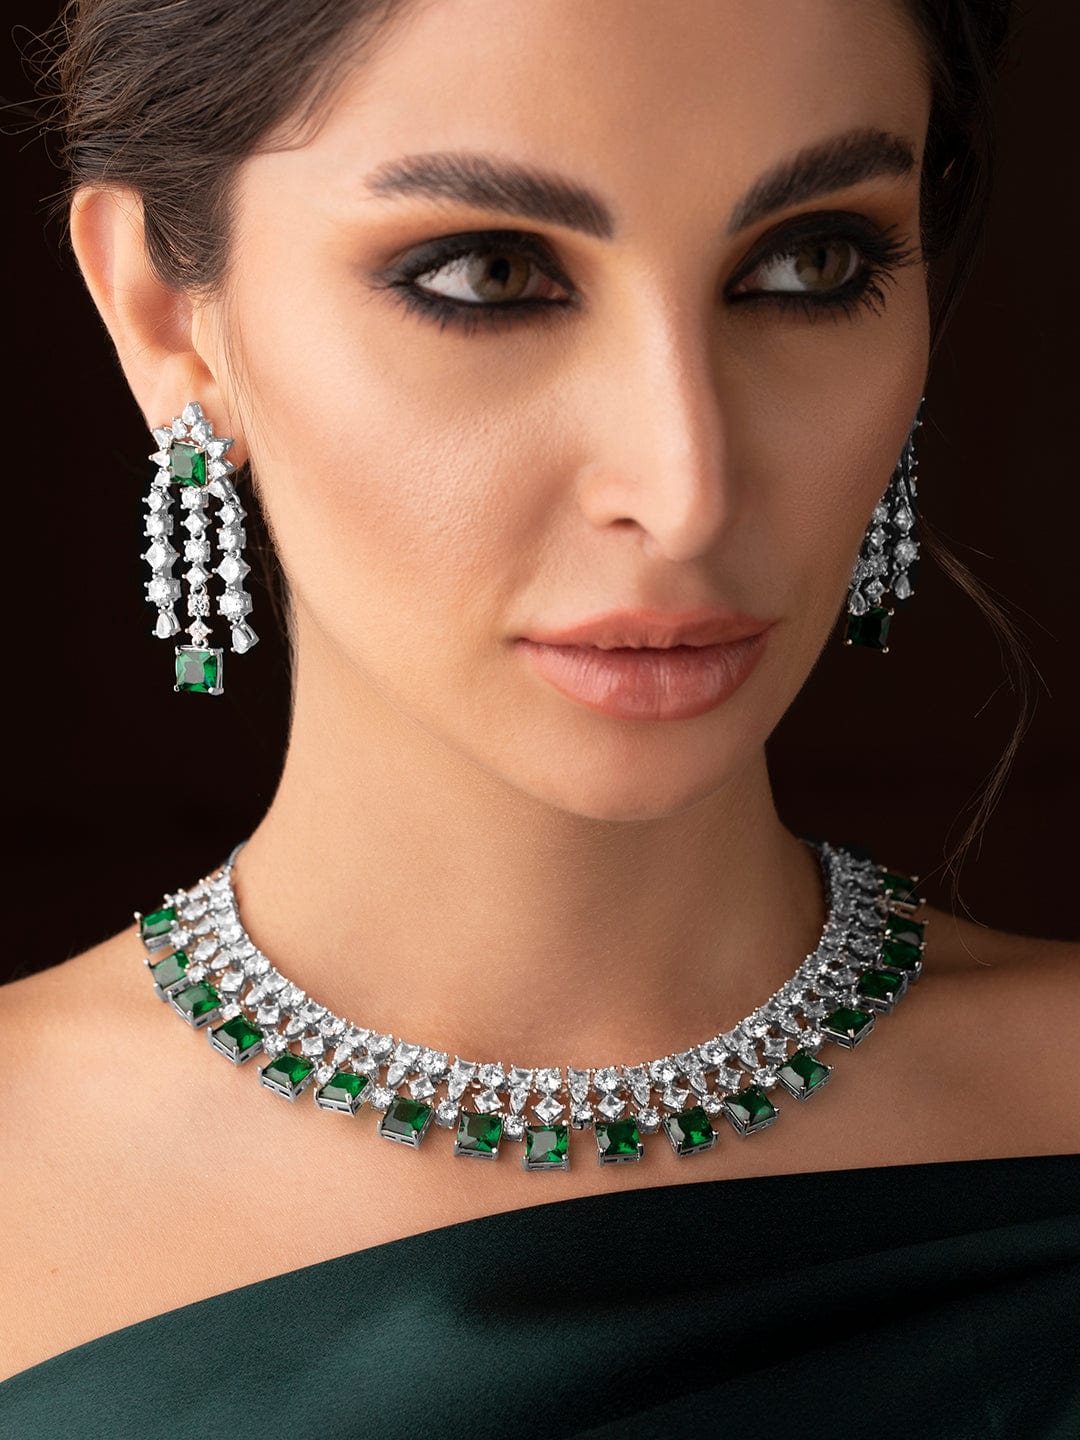 Rubans Silver Plated Necklace Set With American Diamonds And Green Stones. Choker Necklace Set